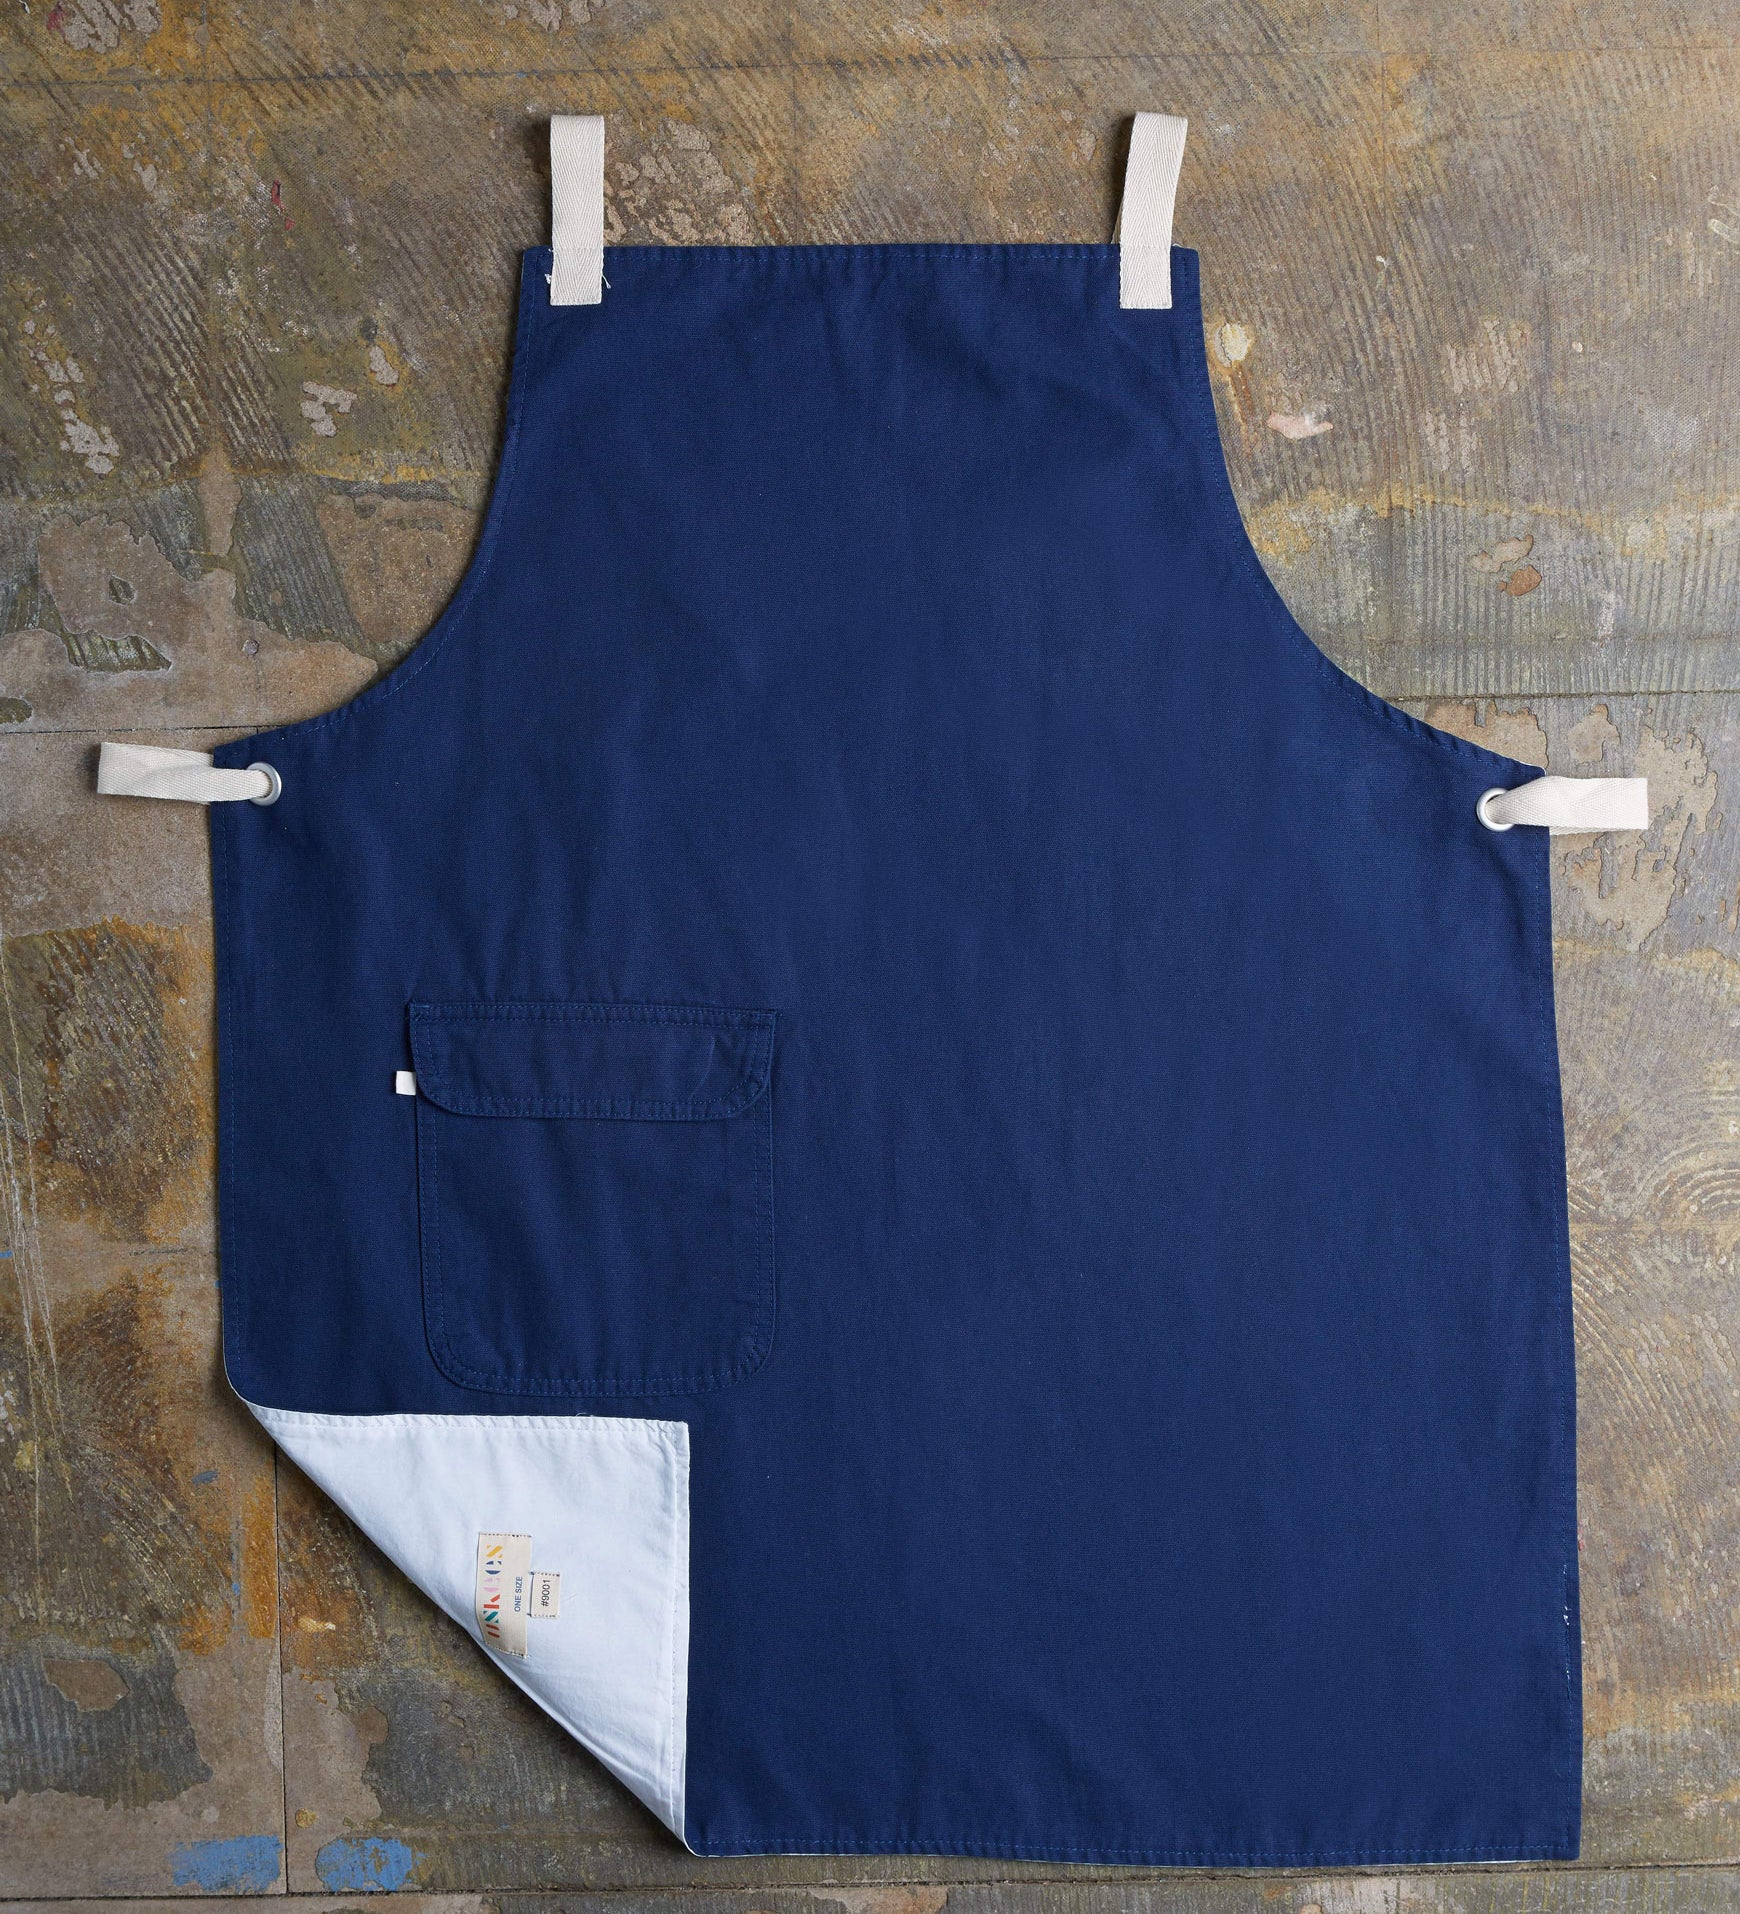 Full, flat view of navy #9001 work apron by Uskees. Showing hip pocket with left corner folded up to reveal lining and 'Uskees' label.